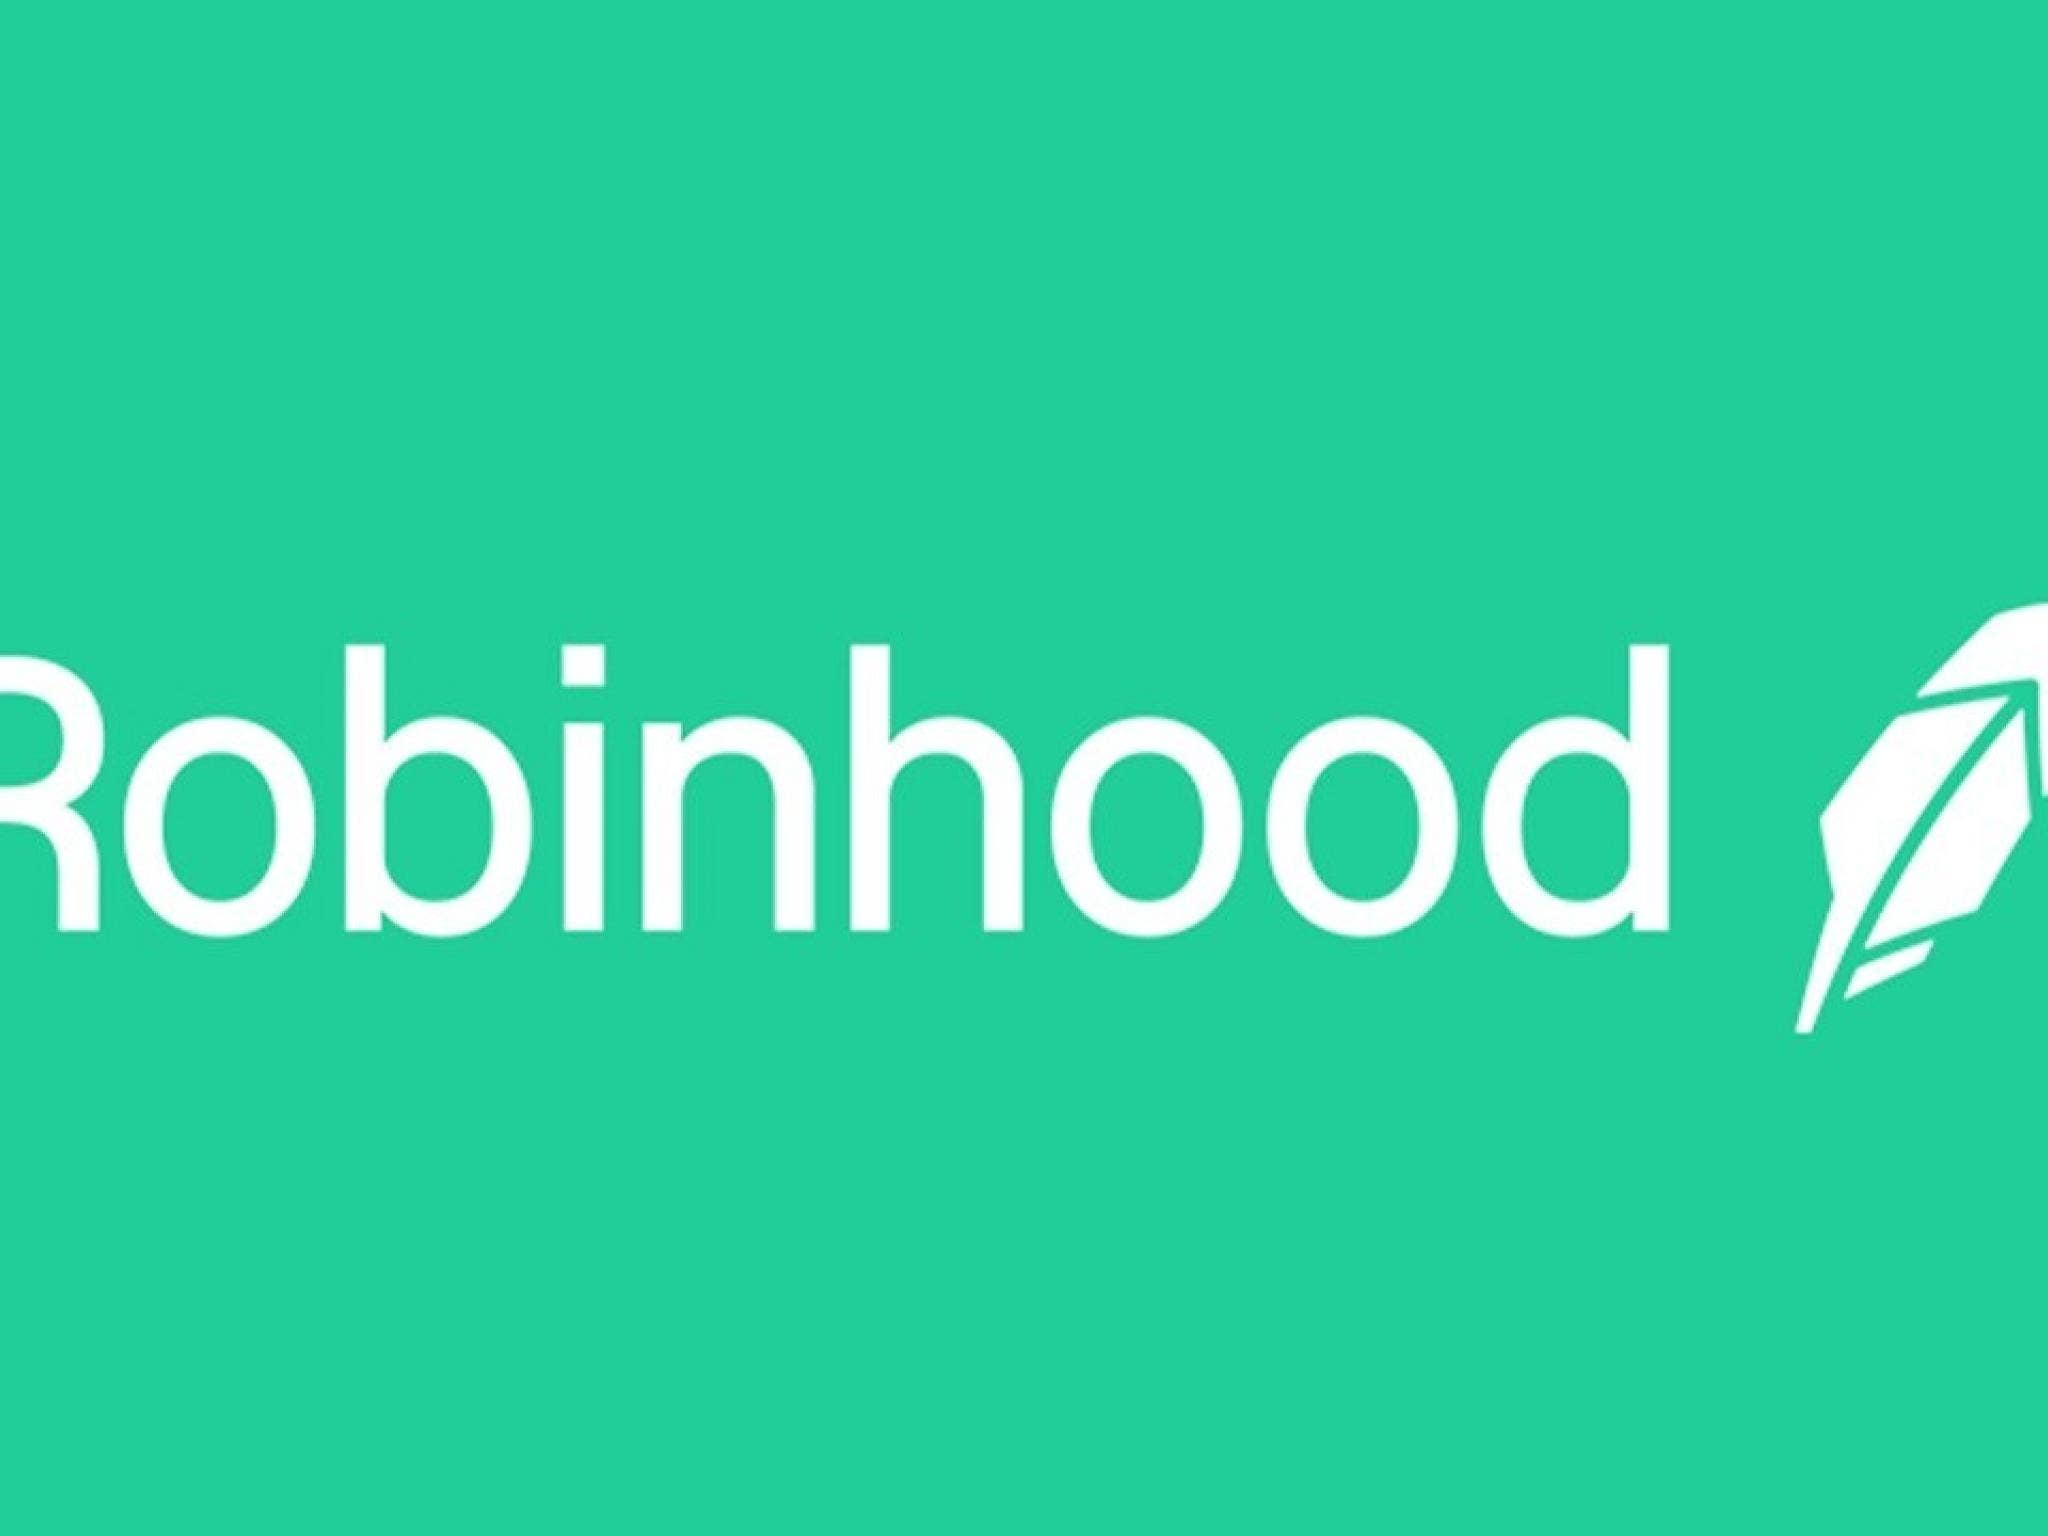 Trading App Robinhood Adds More Cryptocurrencies To Its Platform